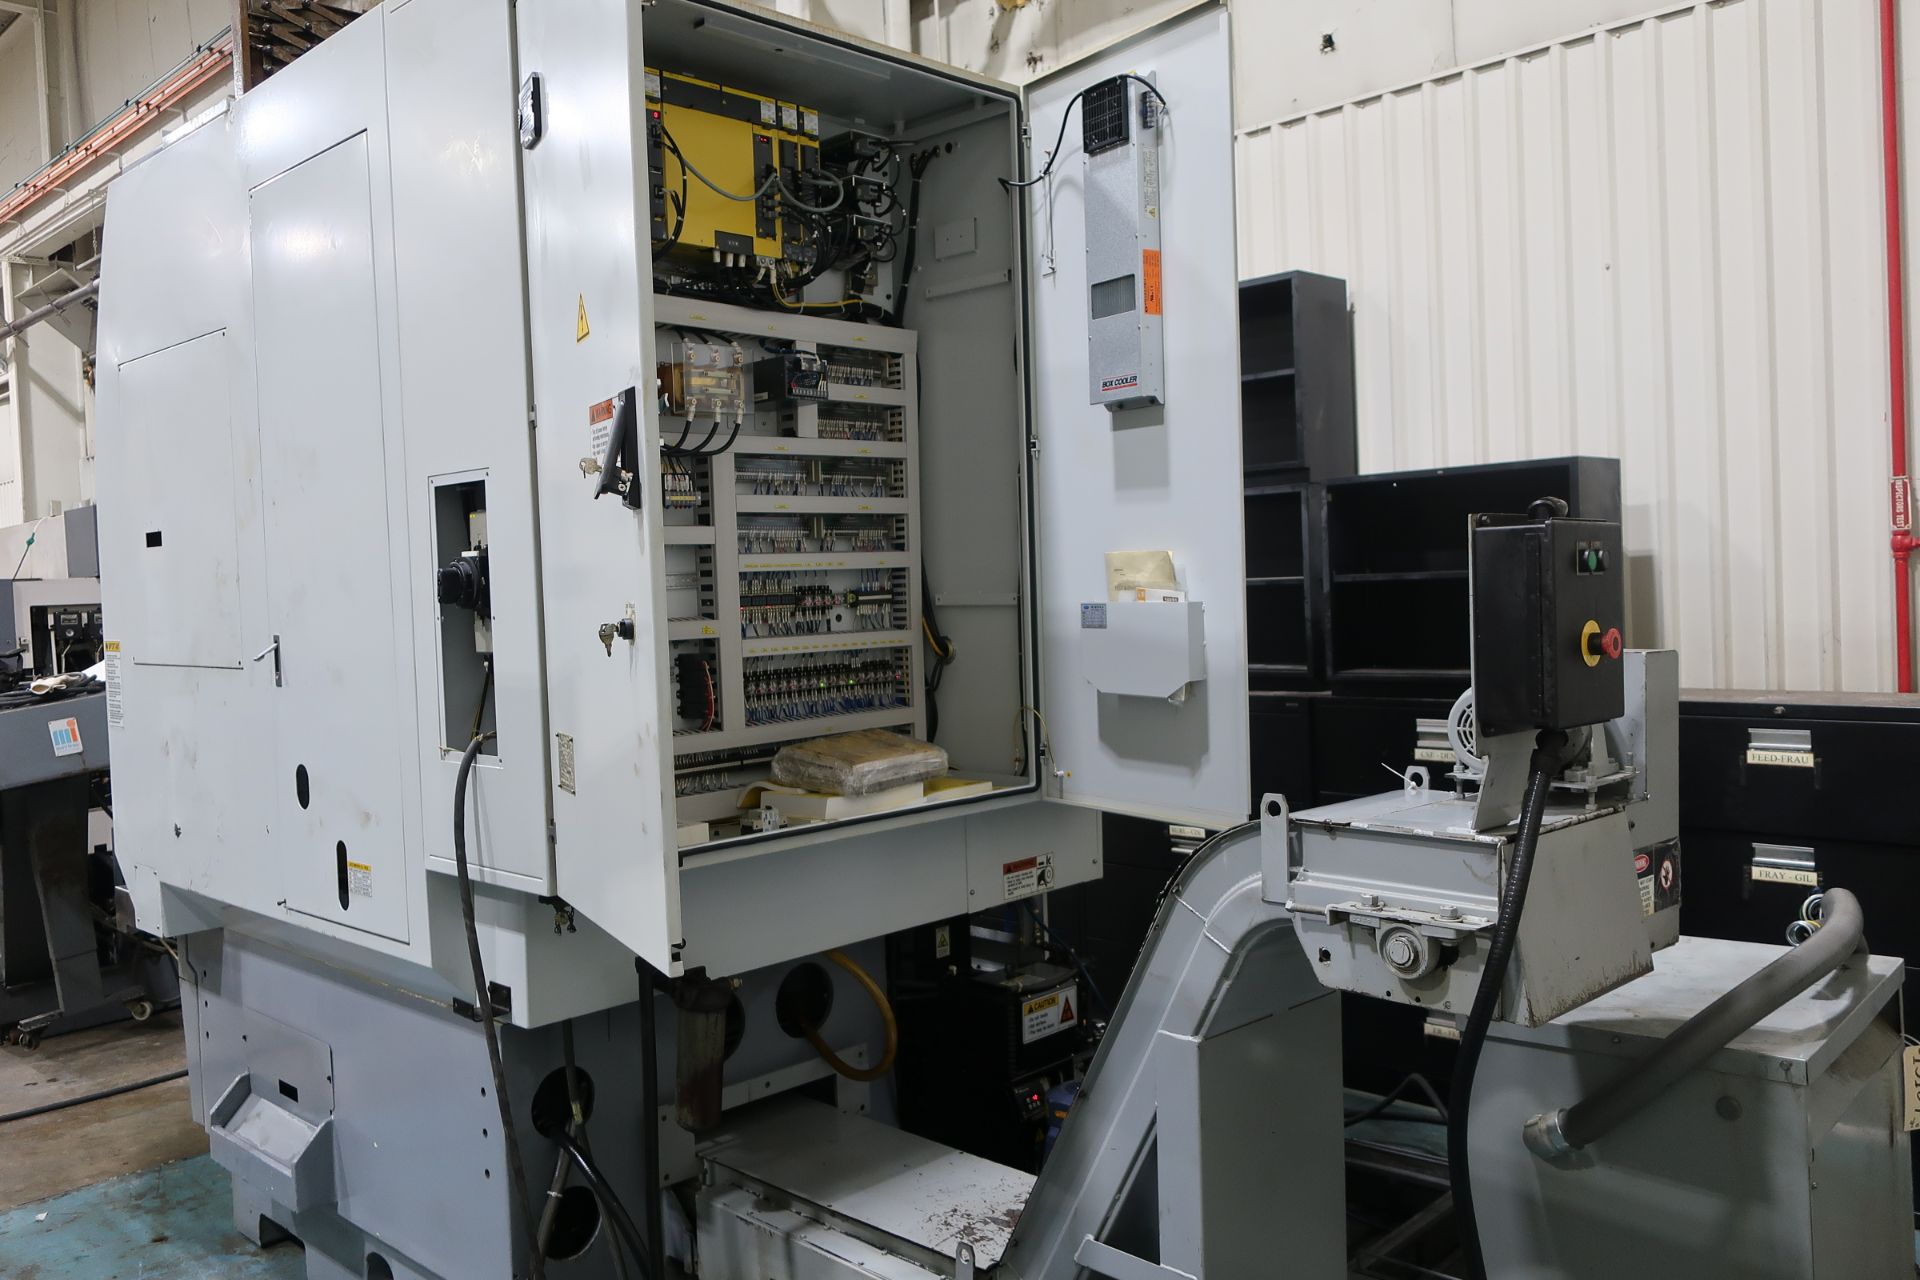 2006 24" Doosan V740M 3-Axis CNC Vertical Turning Center w/live tooling and C-axis, S/N 1013 - Image 9 of 13